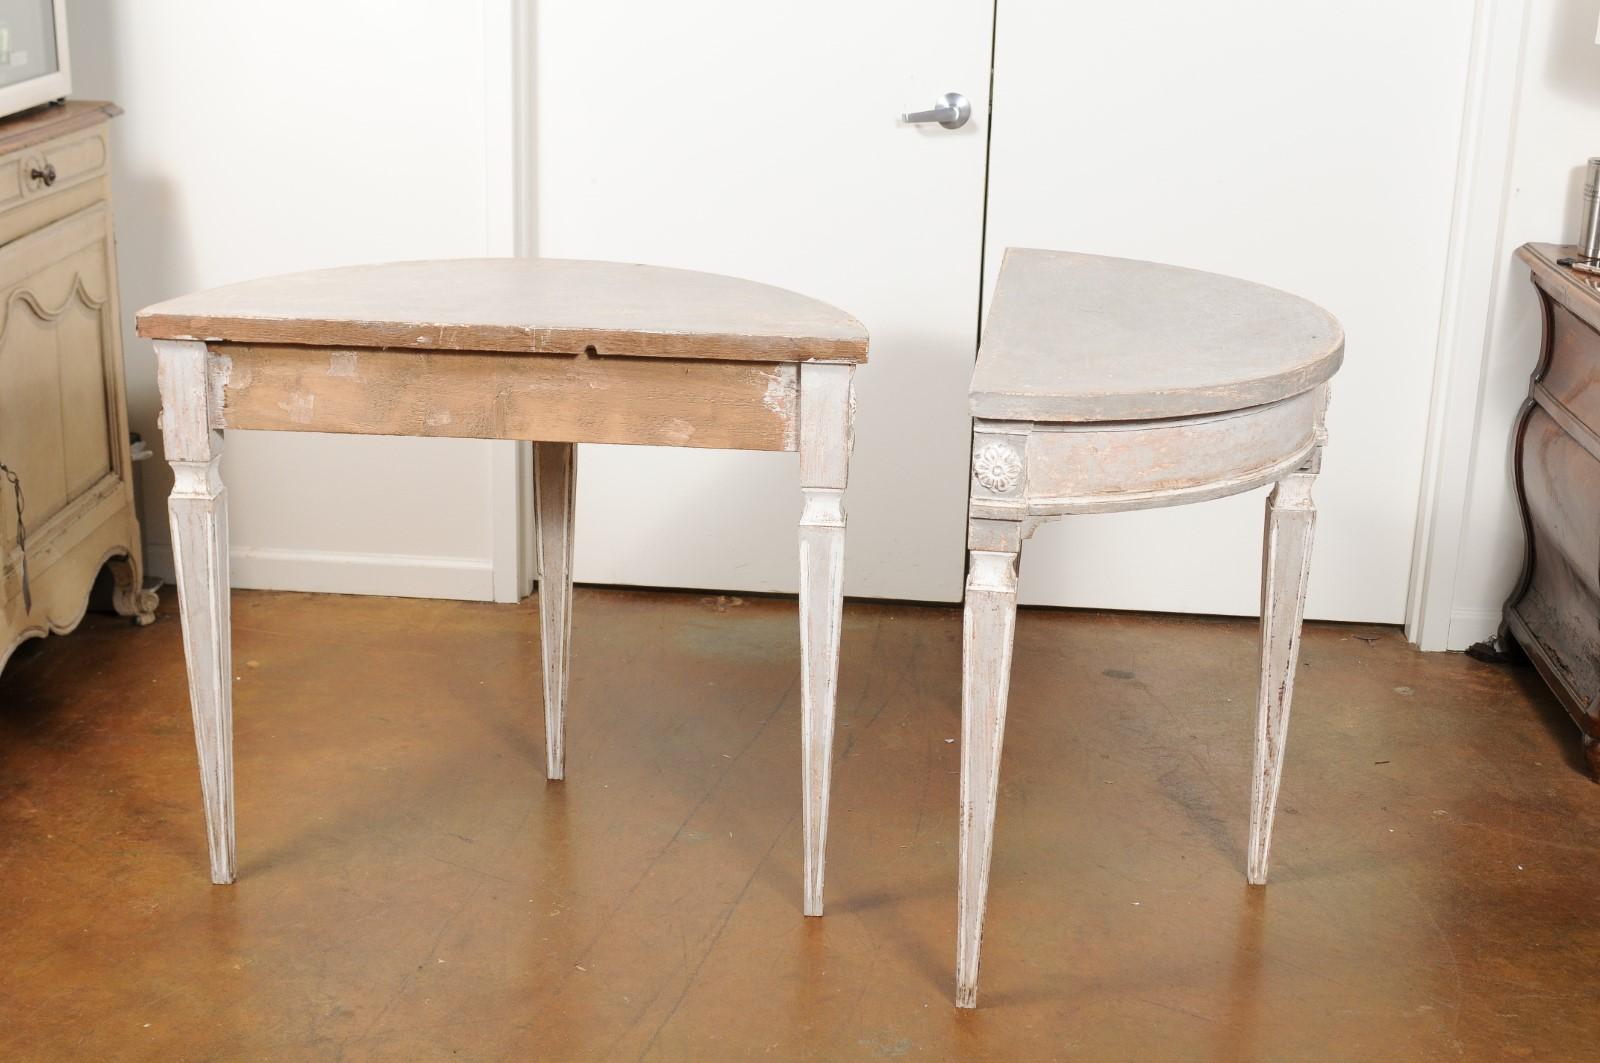 Pair of Italian 19th Century Florentine Demilune Tables Painted in Soft Grey (Holz)